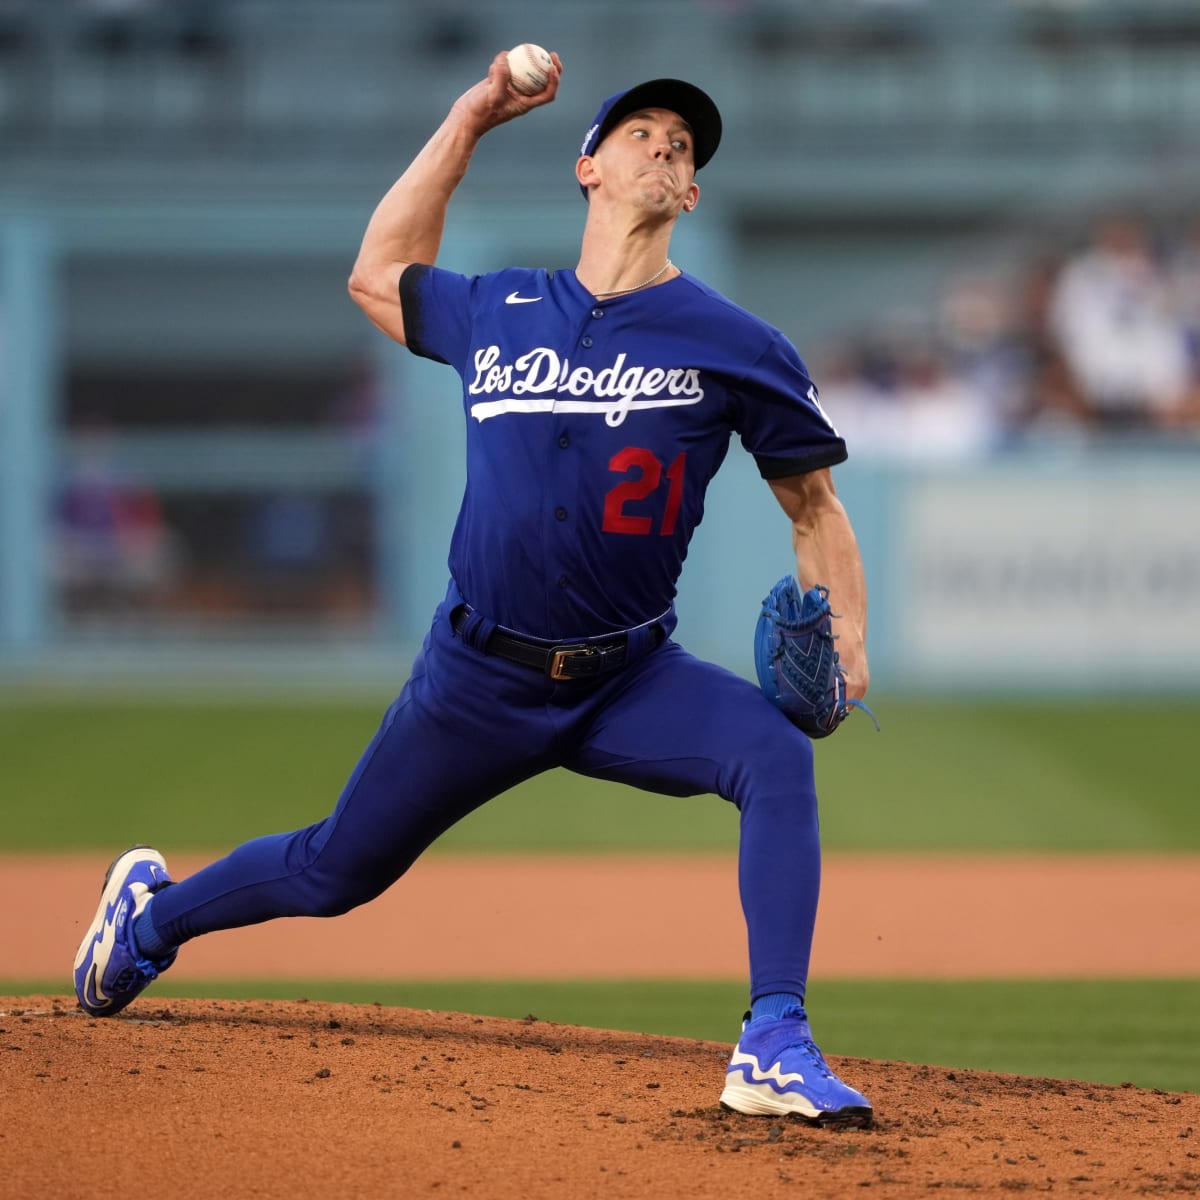 Los Angeles Dodgers: What's up with Walker Buehler's pants?